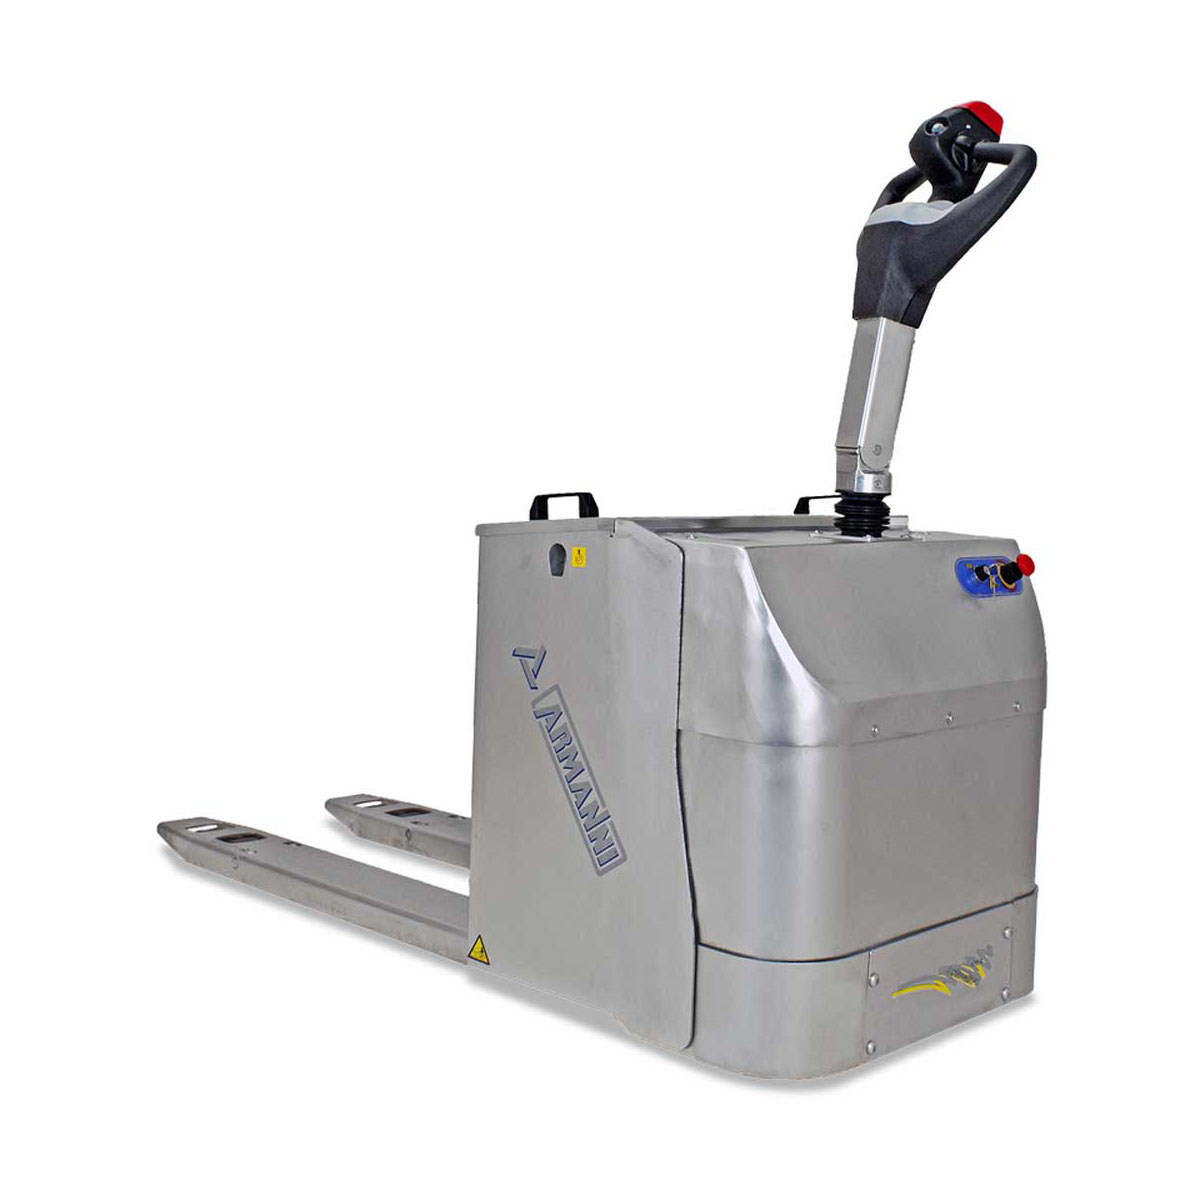 Buy 2-Way Electric Pallet Truck in 2-Way Pallet Trucks from Armanni available at Astrolift NZ